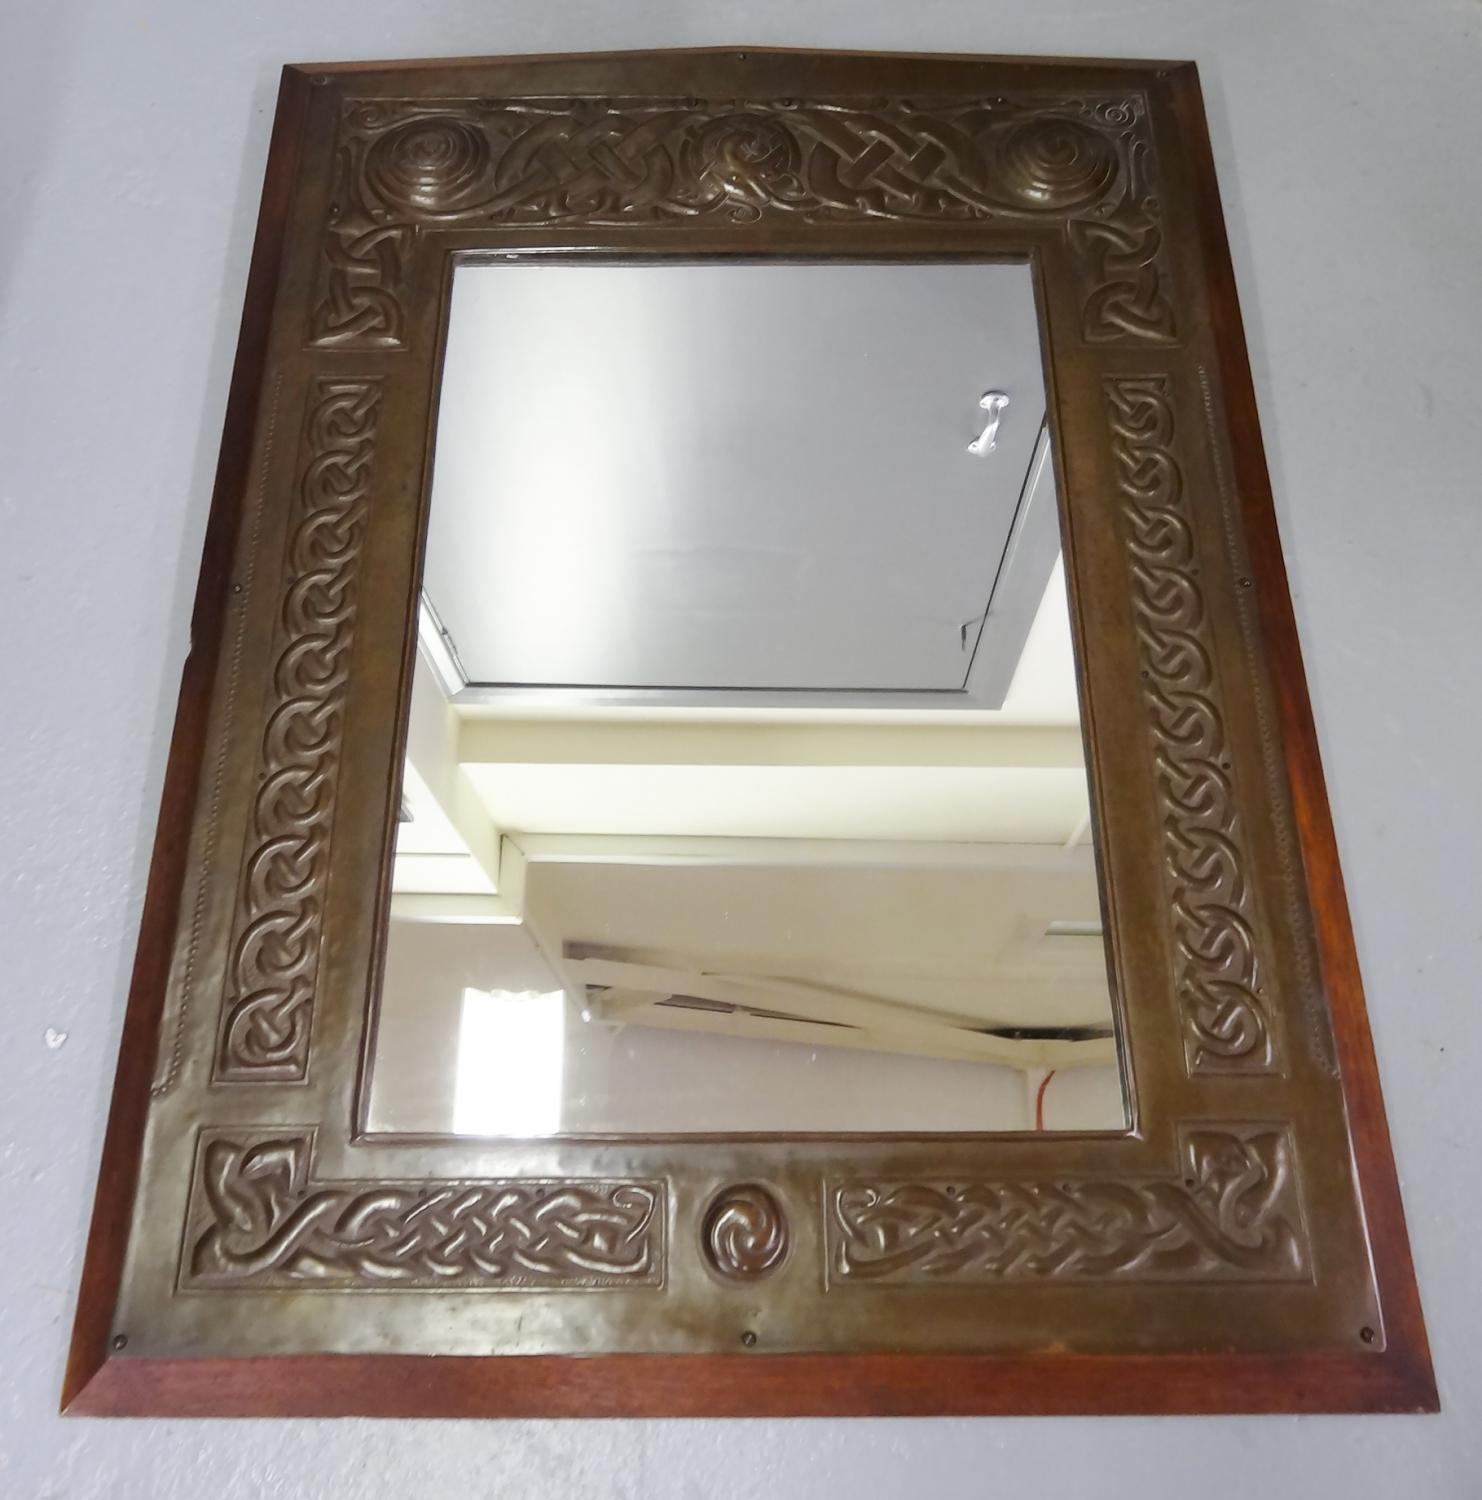 Irish Arts & Crafts Celtic Youghal large copper framed mirror